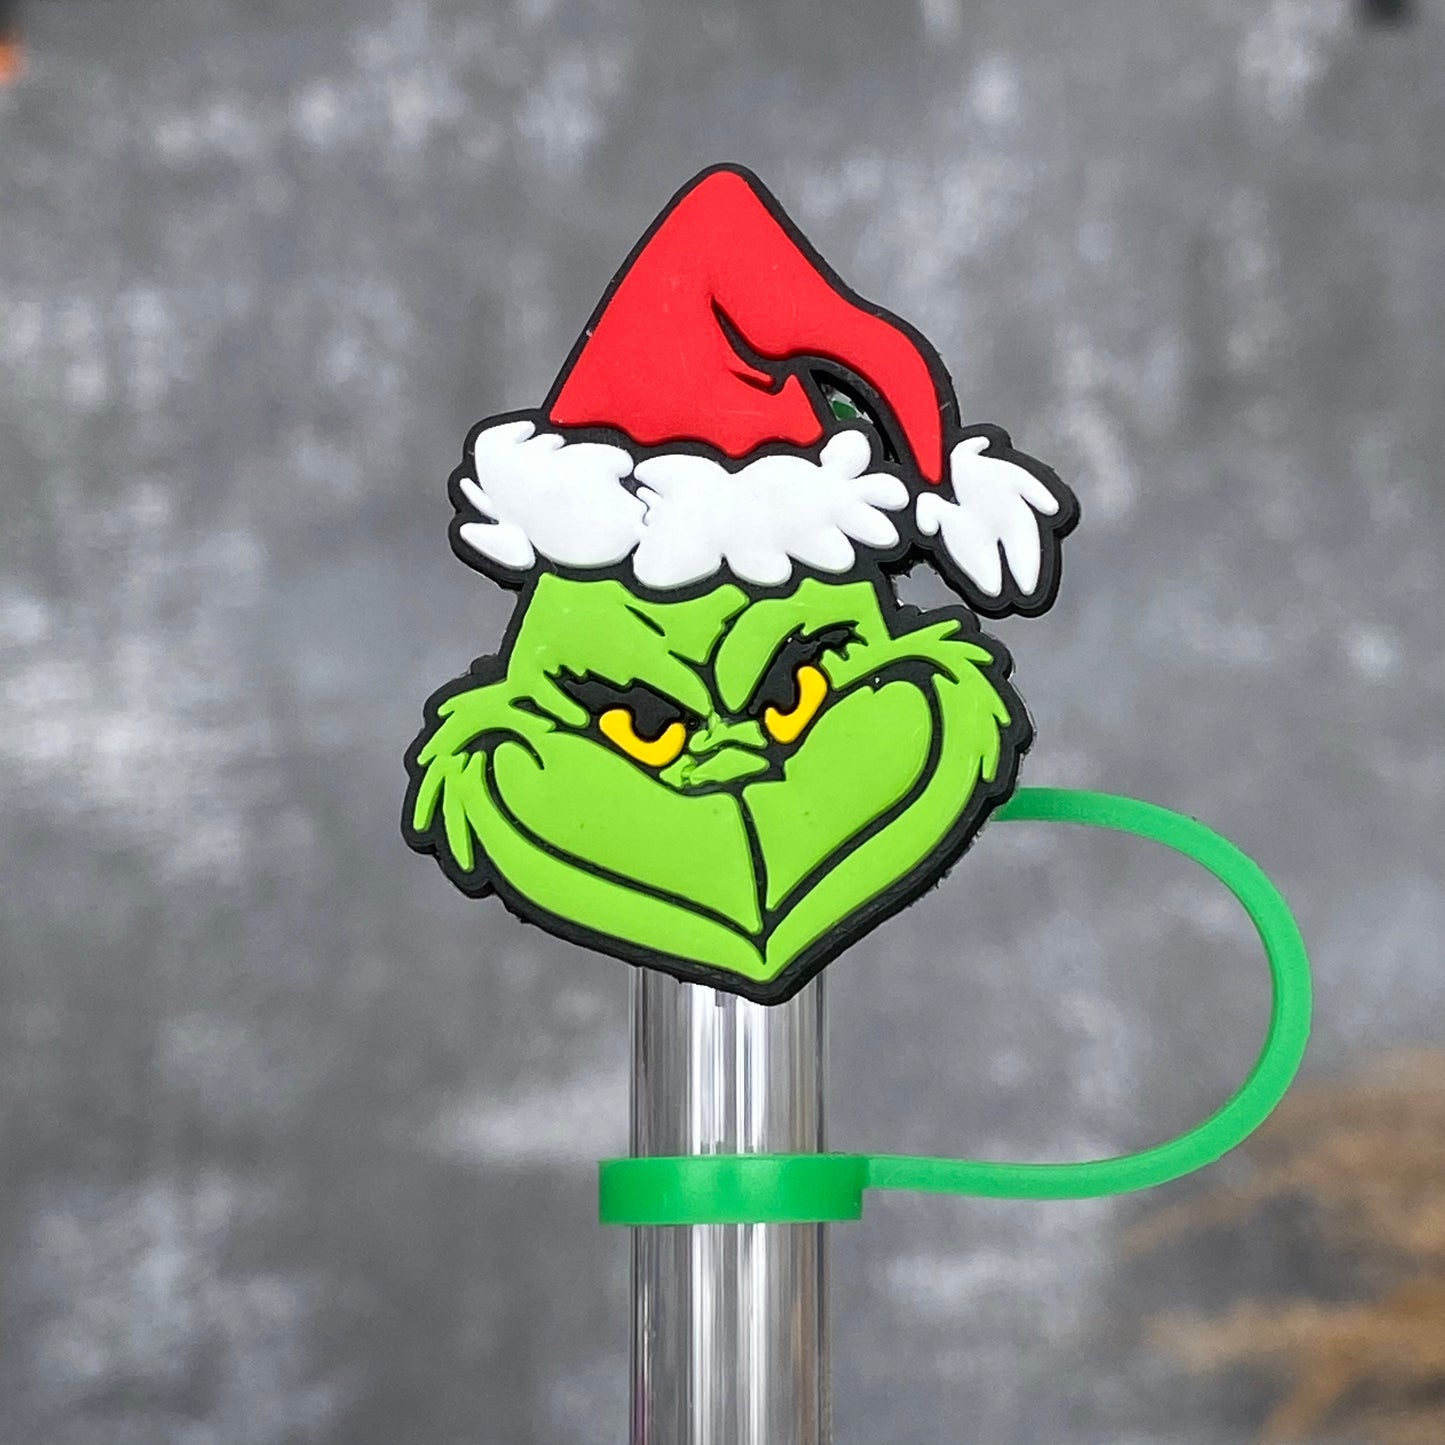 Christmas Straw Cover Stanley Straw Topper Grinch Straw Topper X-mas Stitch  Straw Cover Yoda Straw Topper Stanley Cup Accessories 